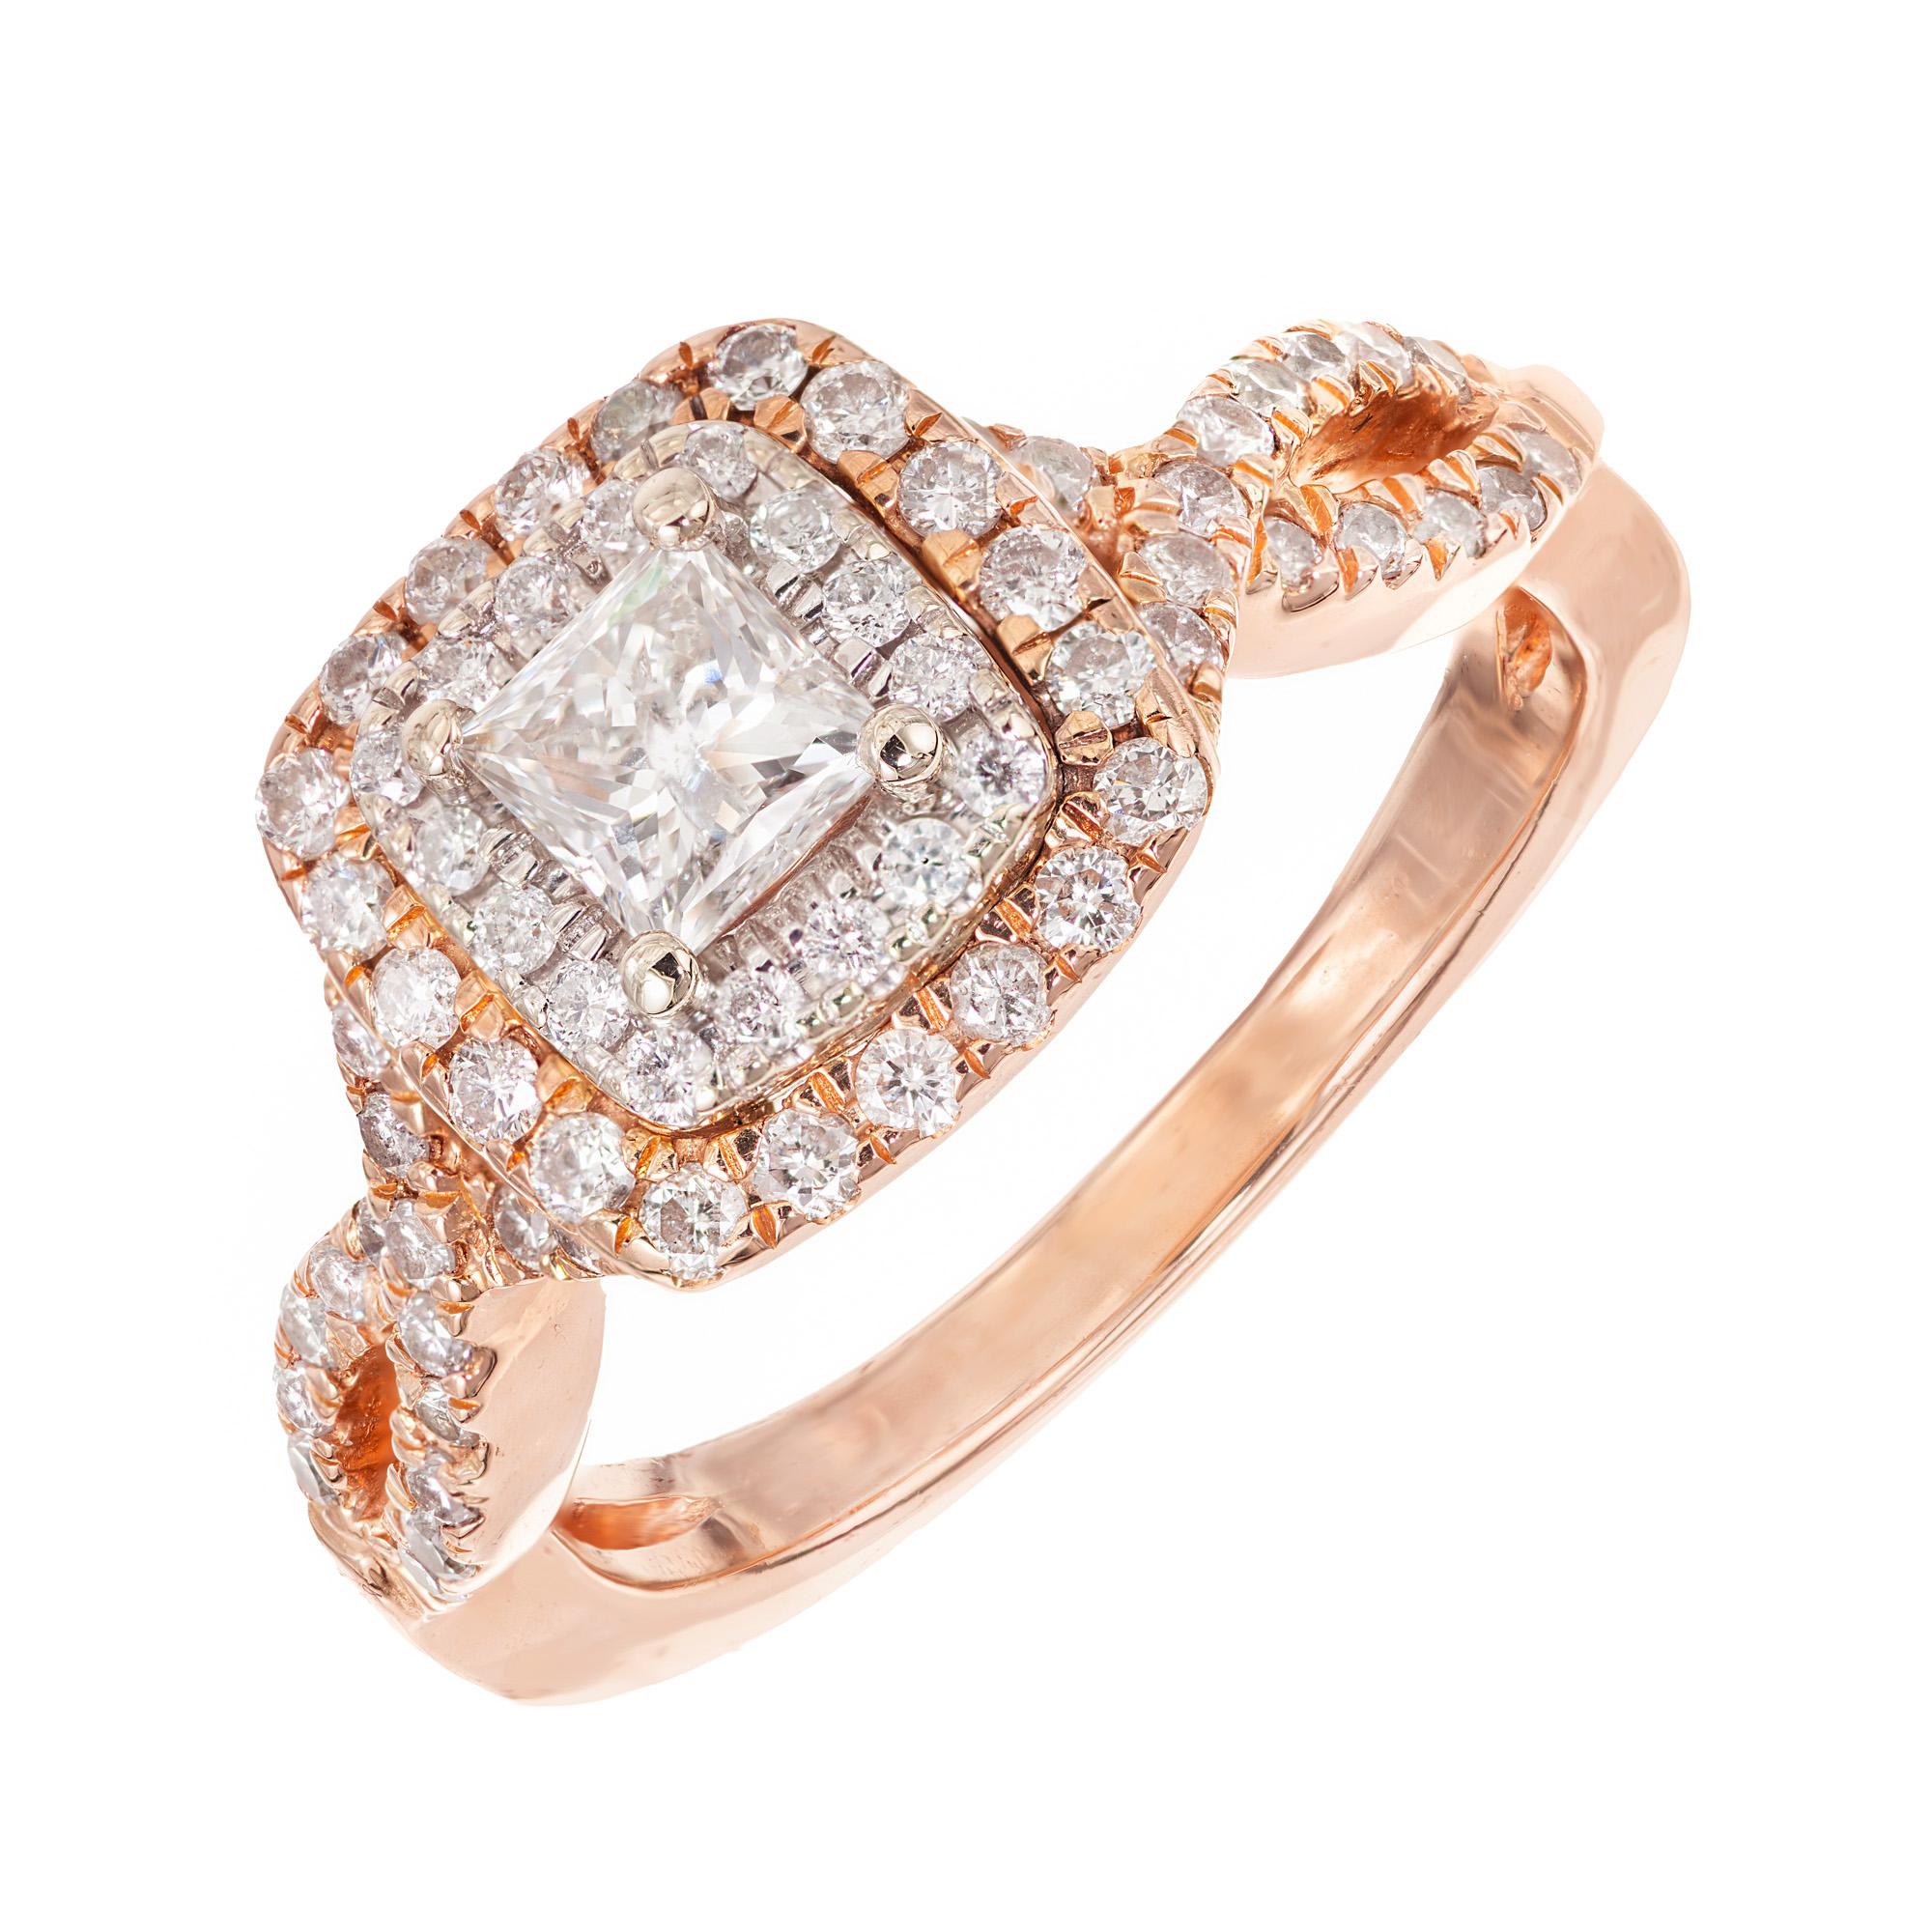 .93 Carat Princess Cut Diamond Halo Rose Gold Engagement Ring In Good Condition For Sale In Stamford, CT